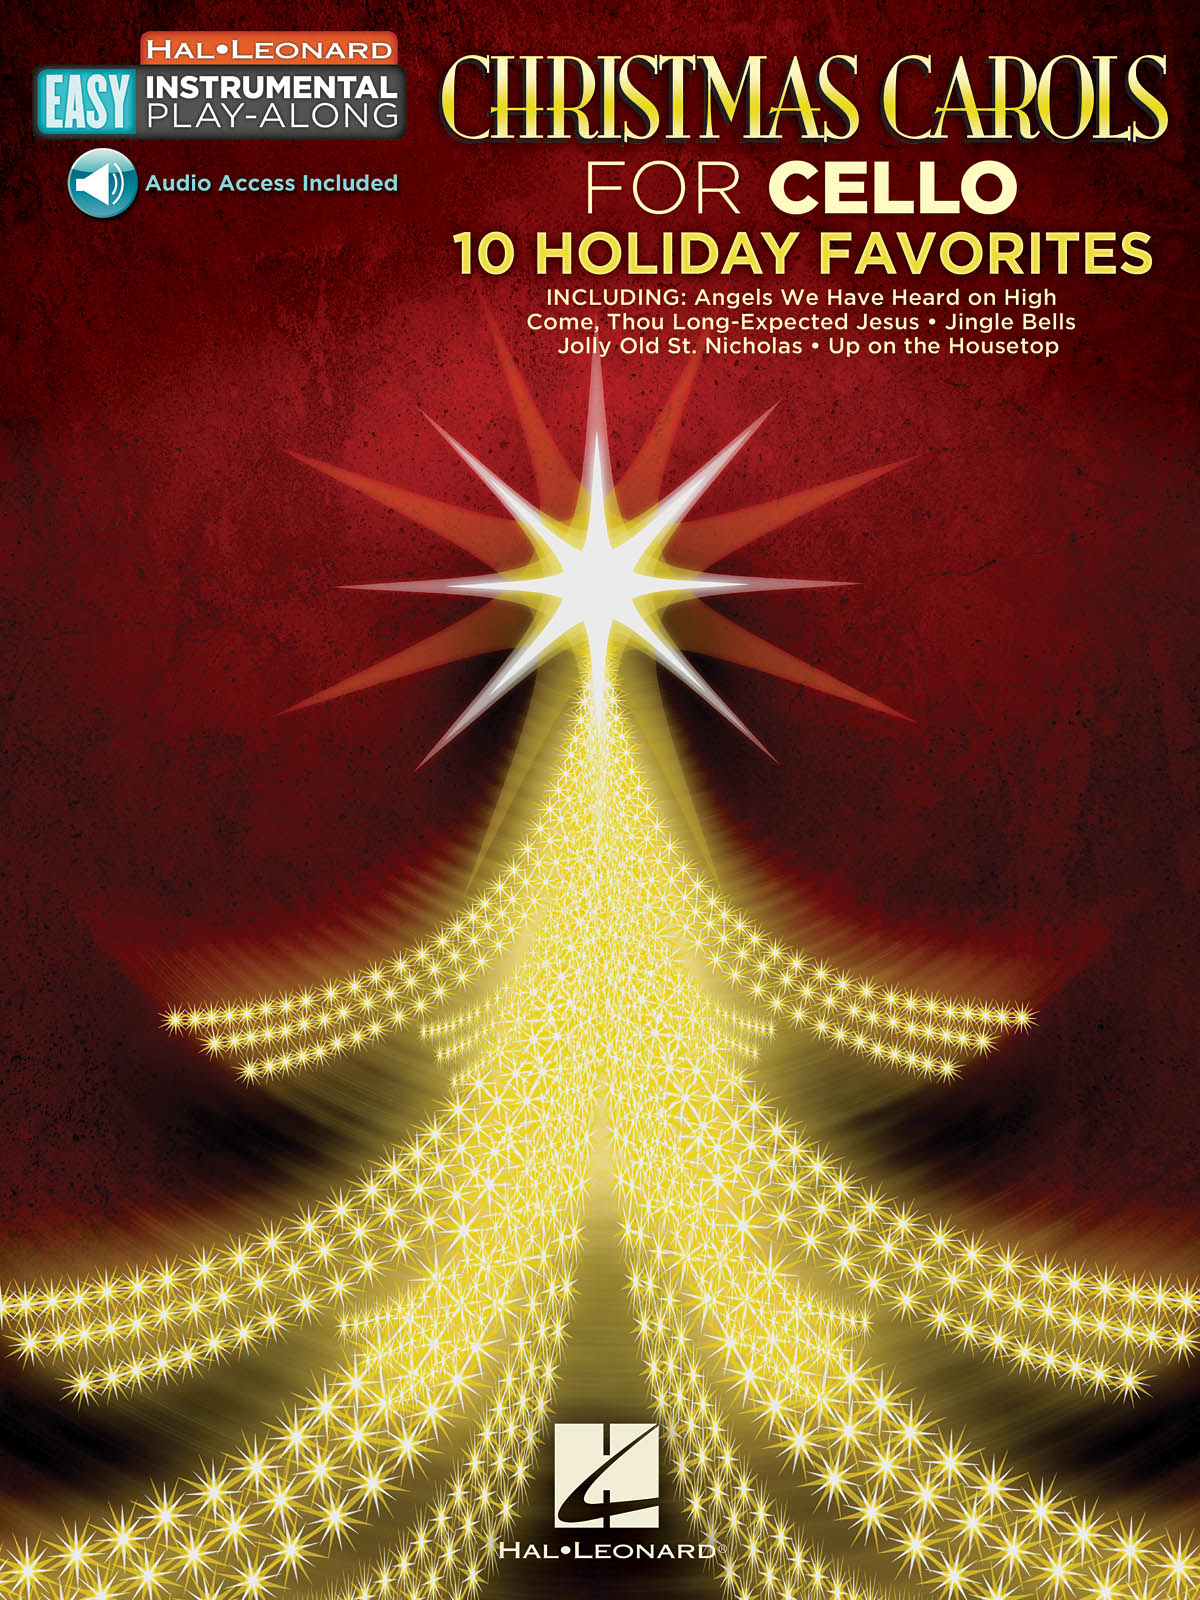 Christmas Carols - Cello: 10 Holiday Favorites - Easy Instrumental Play-Along Book with Online Audio Tracks - noty pro violoncello